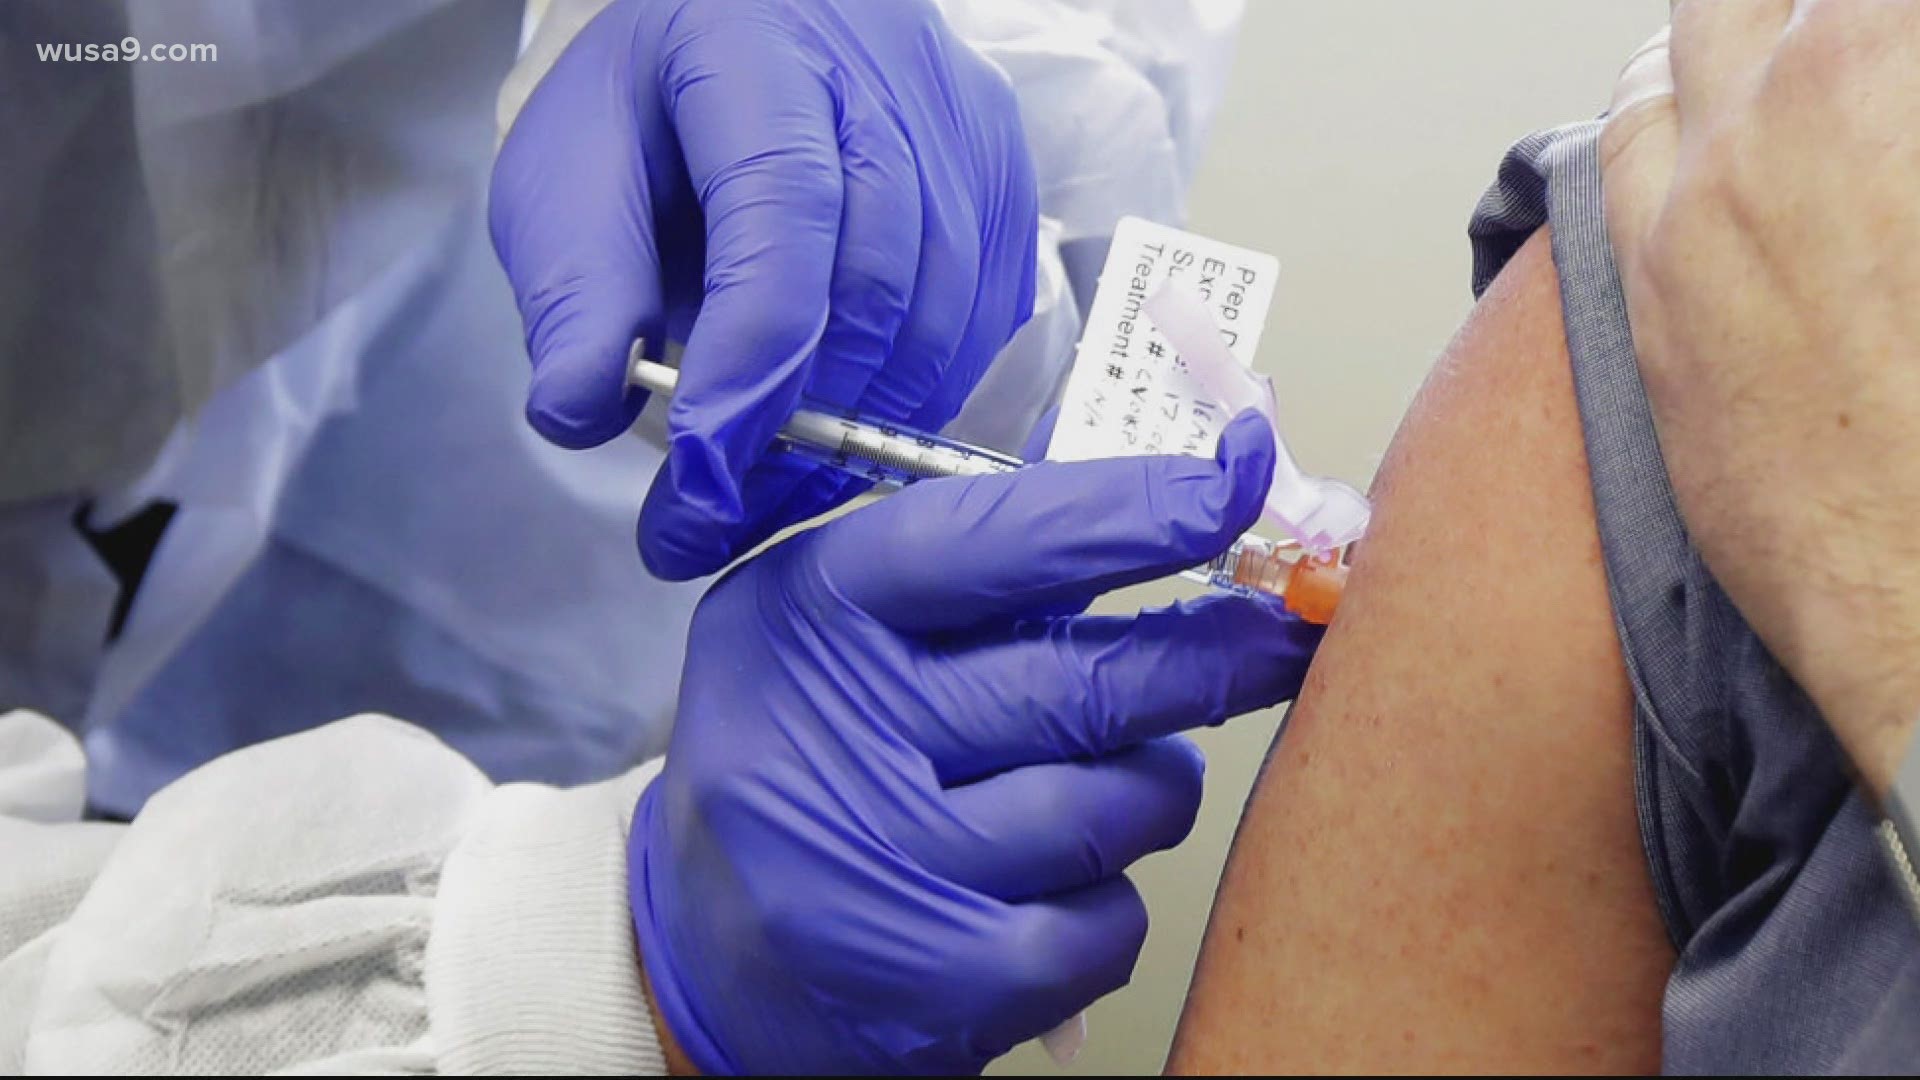 Experts warn a vaccine is not a silver bullet for returning to pre-pandemic normal.